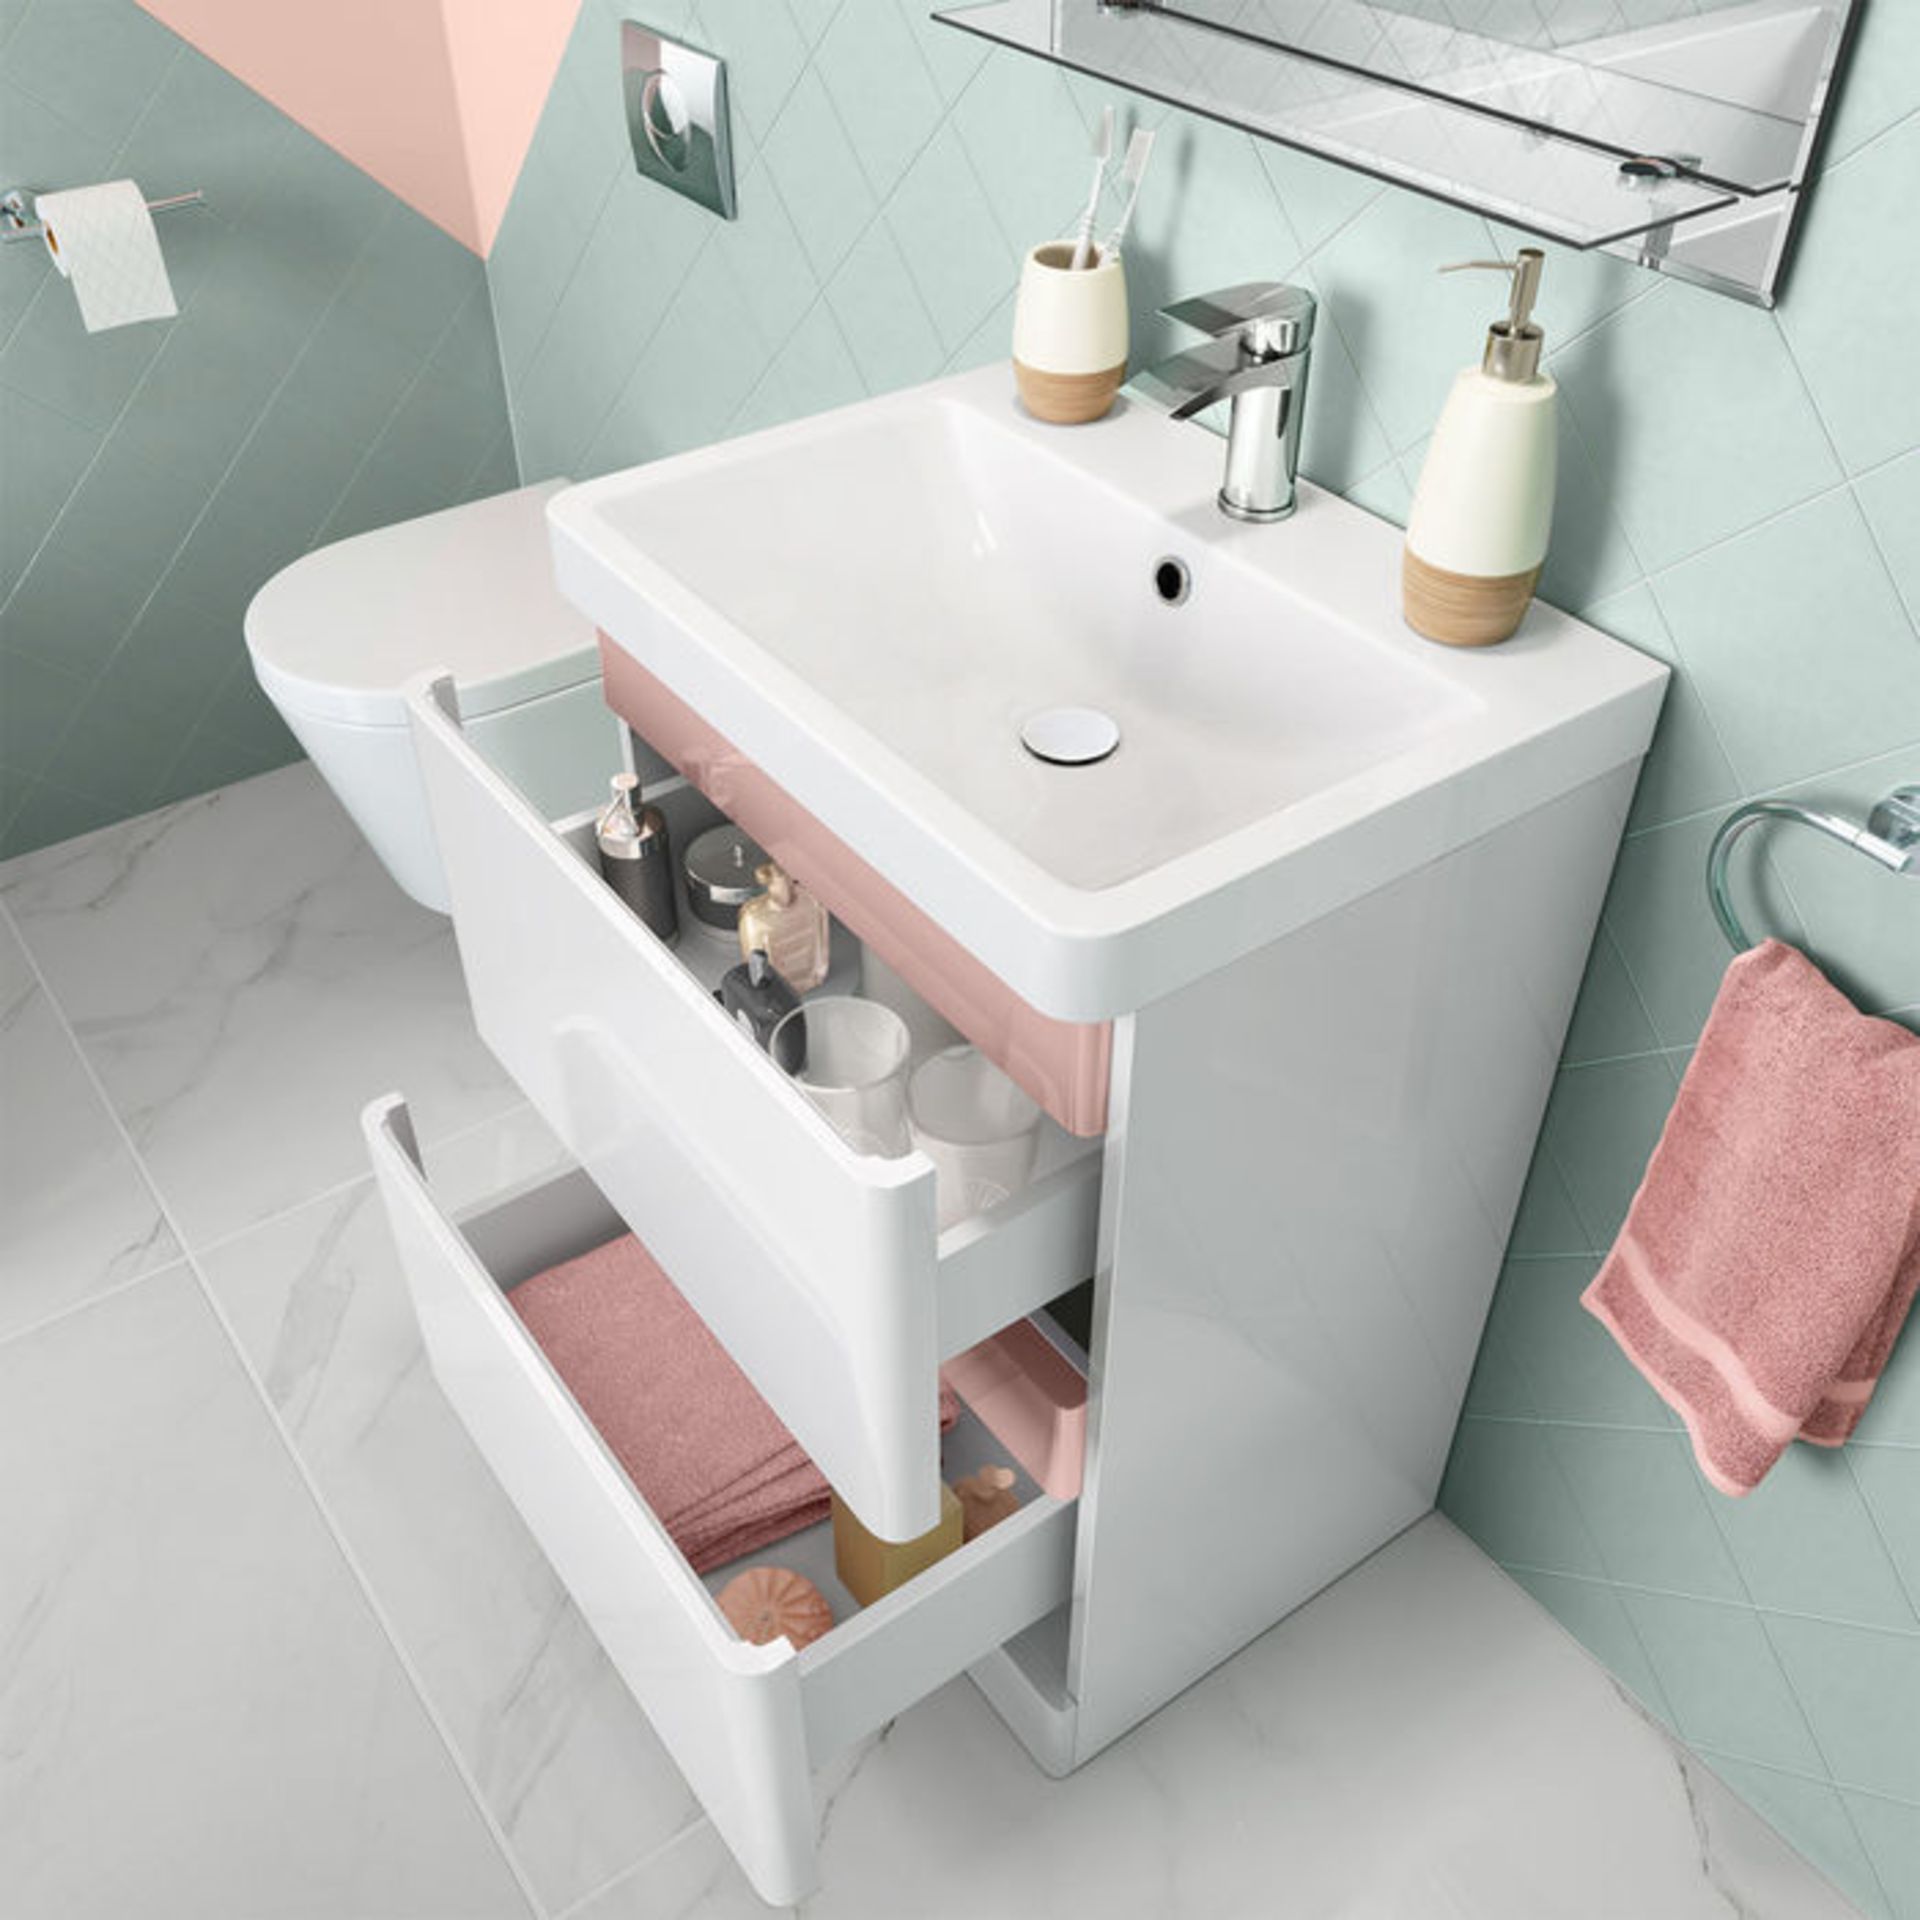 New & Boxed 600mm Denver Floor Standing Vanity Unit - Rose Gold Edition. RRP £749.99.Comes Co... - Image 2 of 3